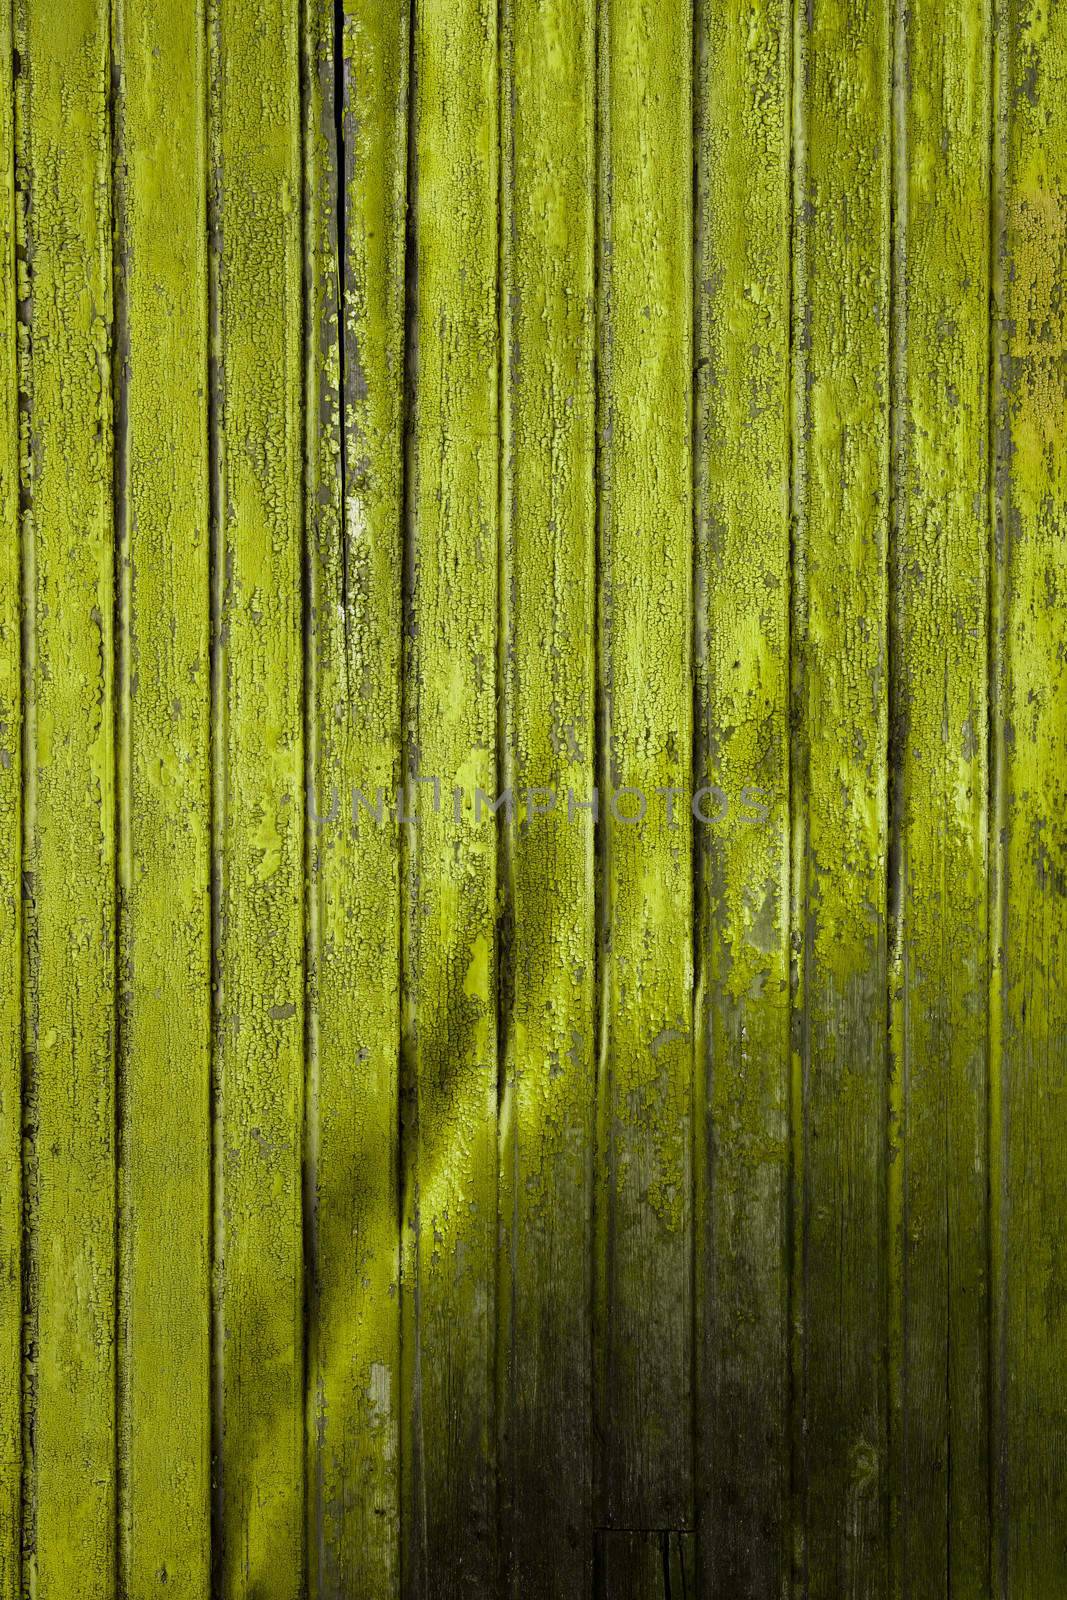 Background picture made of old green wood boards